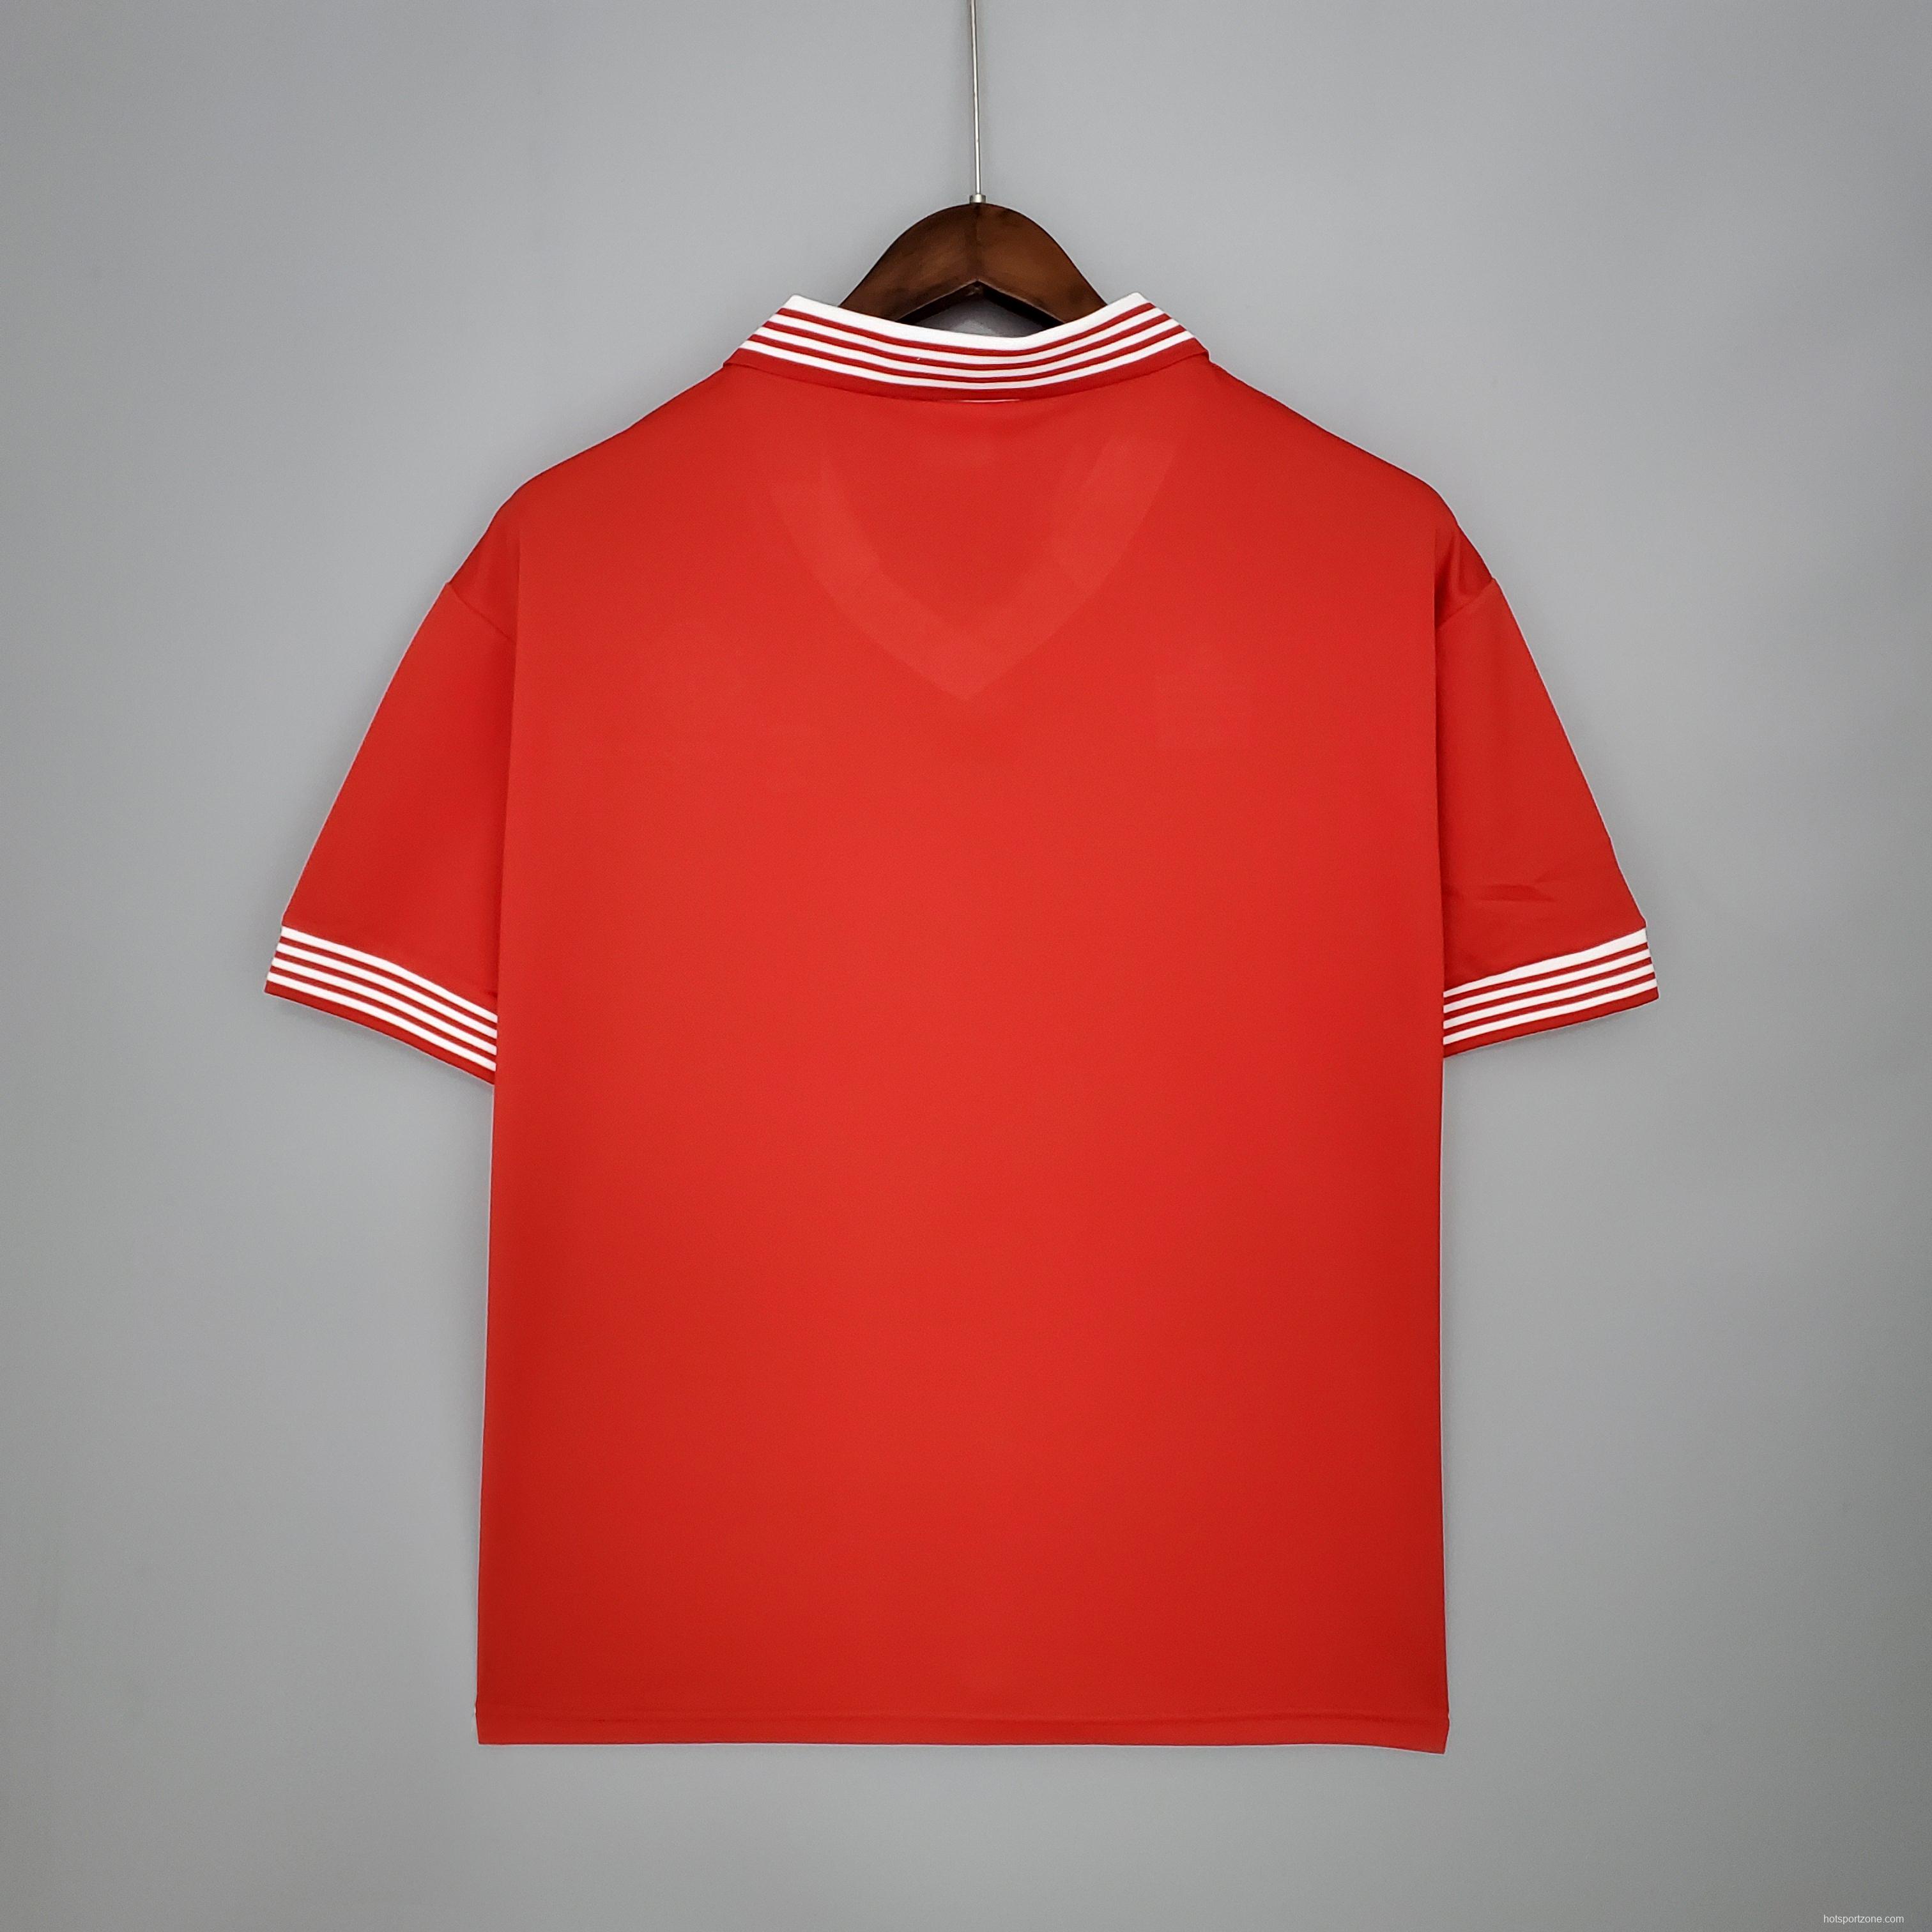 Retro Manchester United 1977 home Soccer Jersey